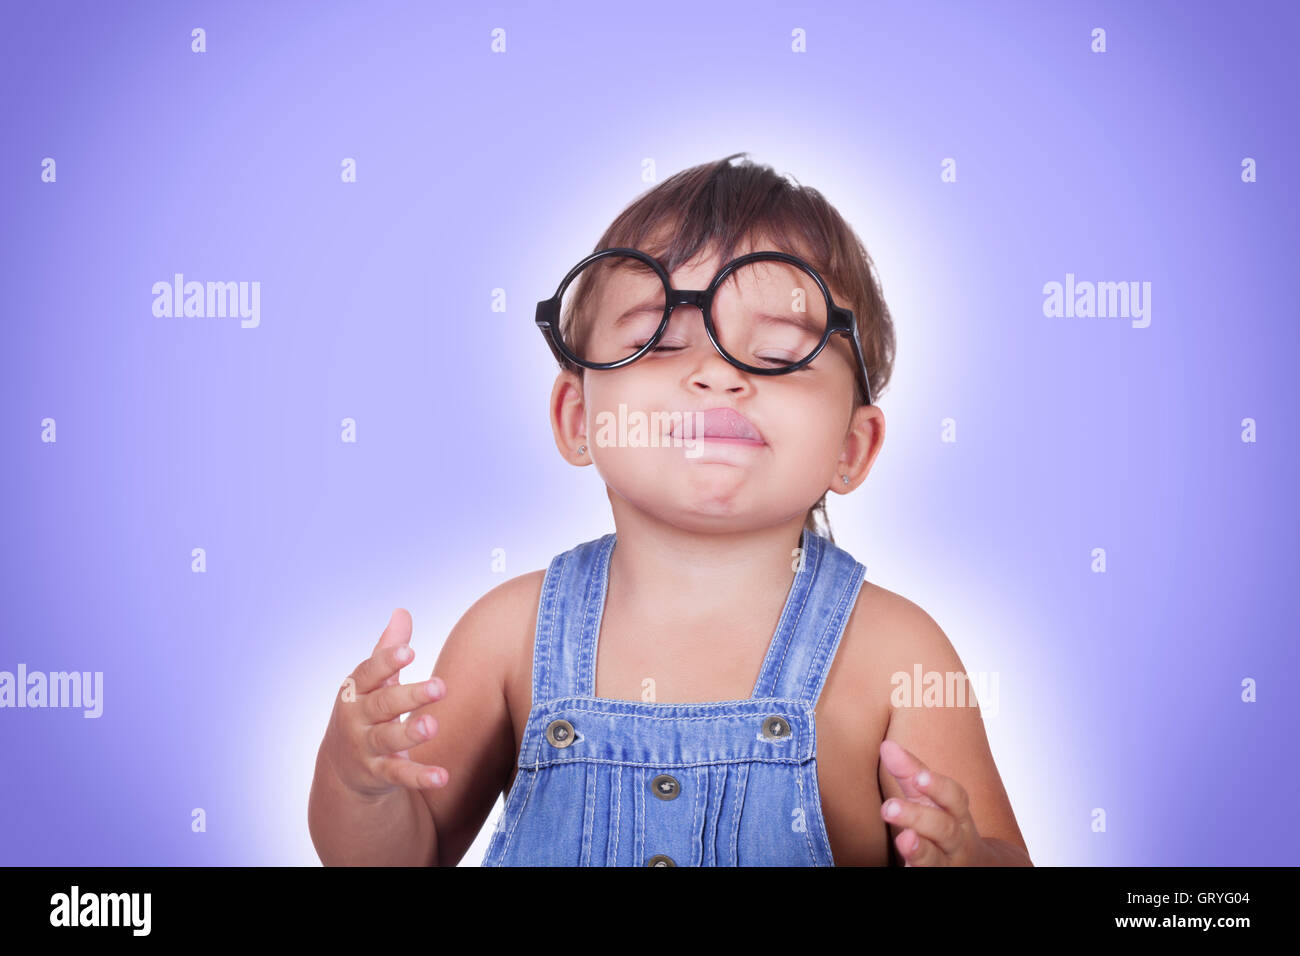 Studio portrait of cute kid in glasses imagines some yummy food with eyes closed licking lips.Isolate.Blue background. Stock Photo